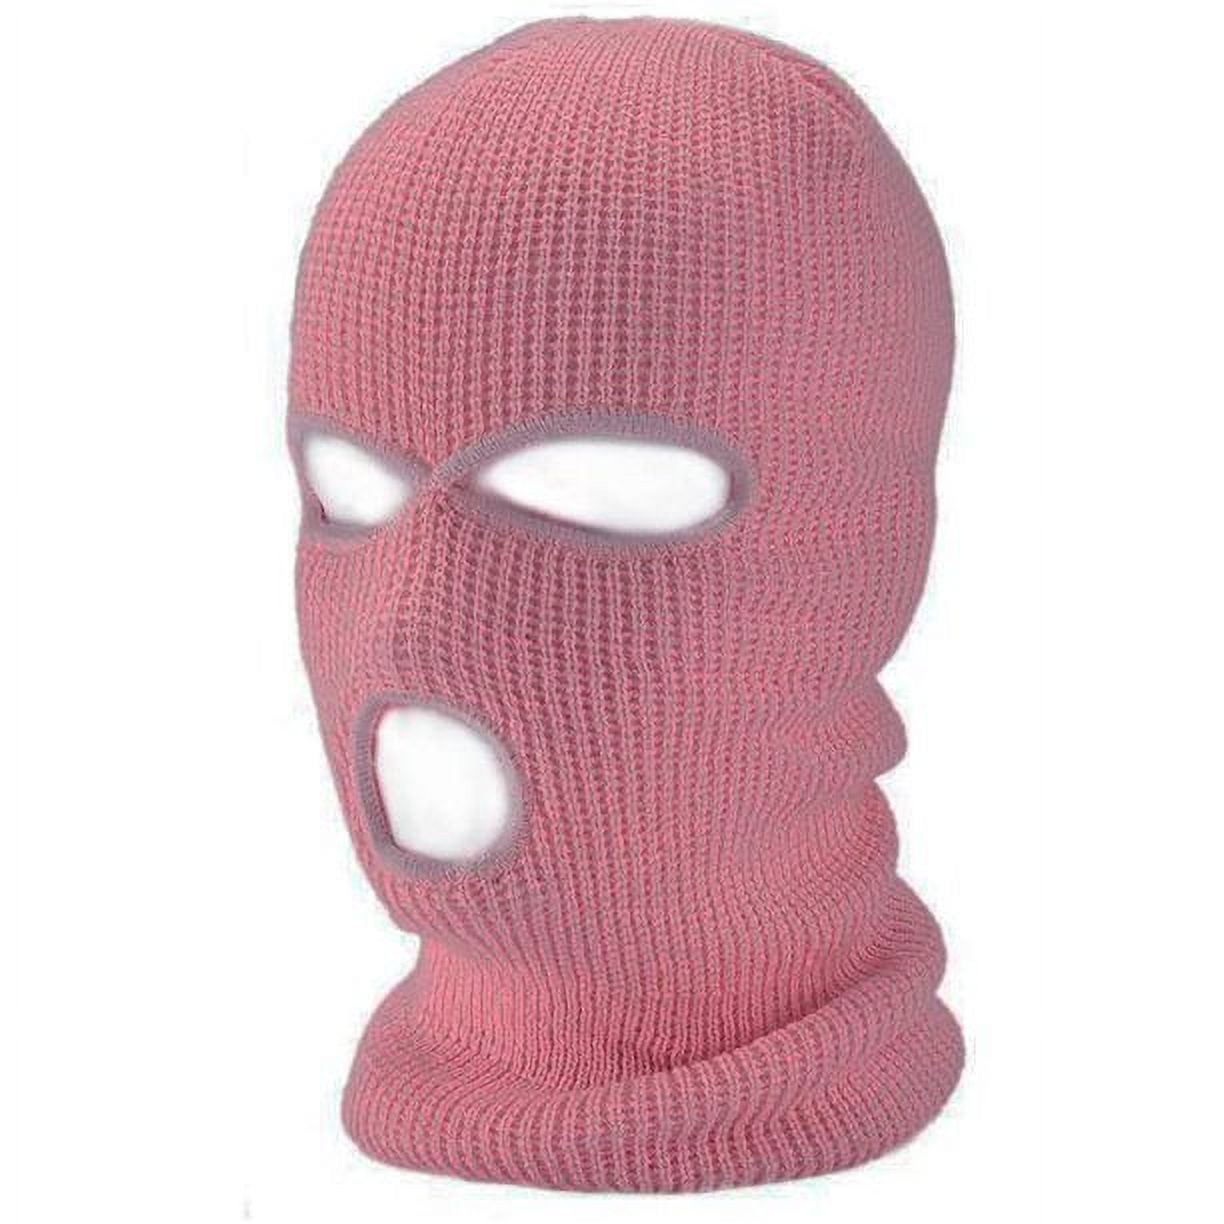 grinderPUNCH 3 Hole Knitted Winter Outdoor Sports Full Face Cover ...